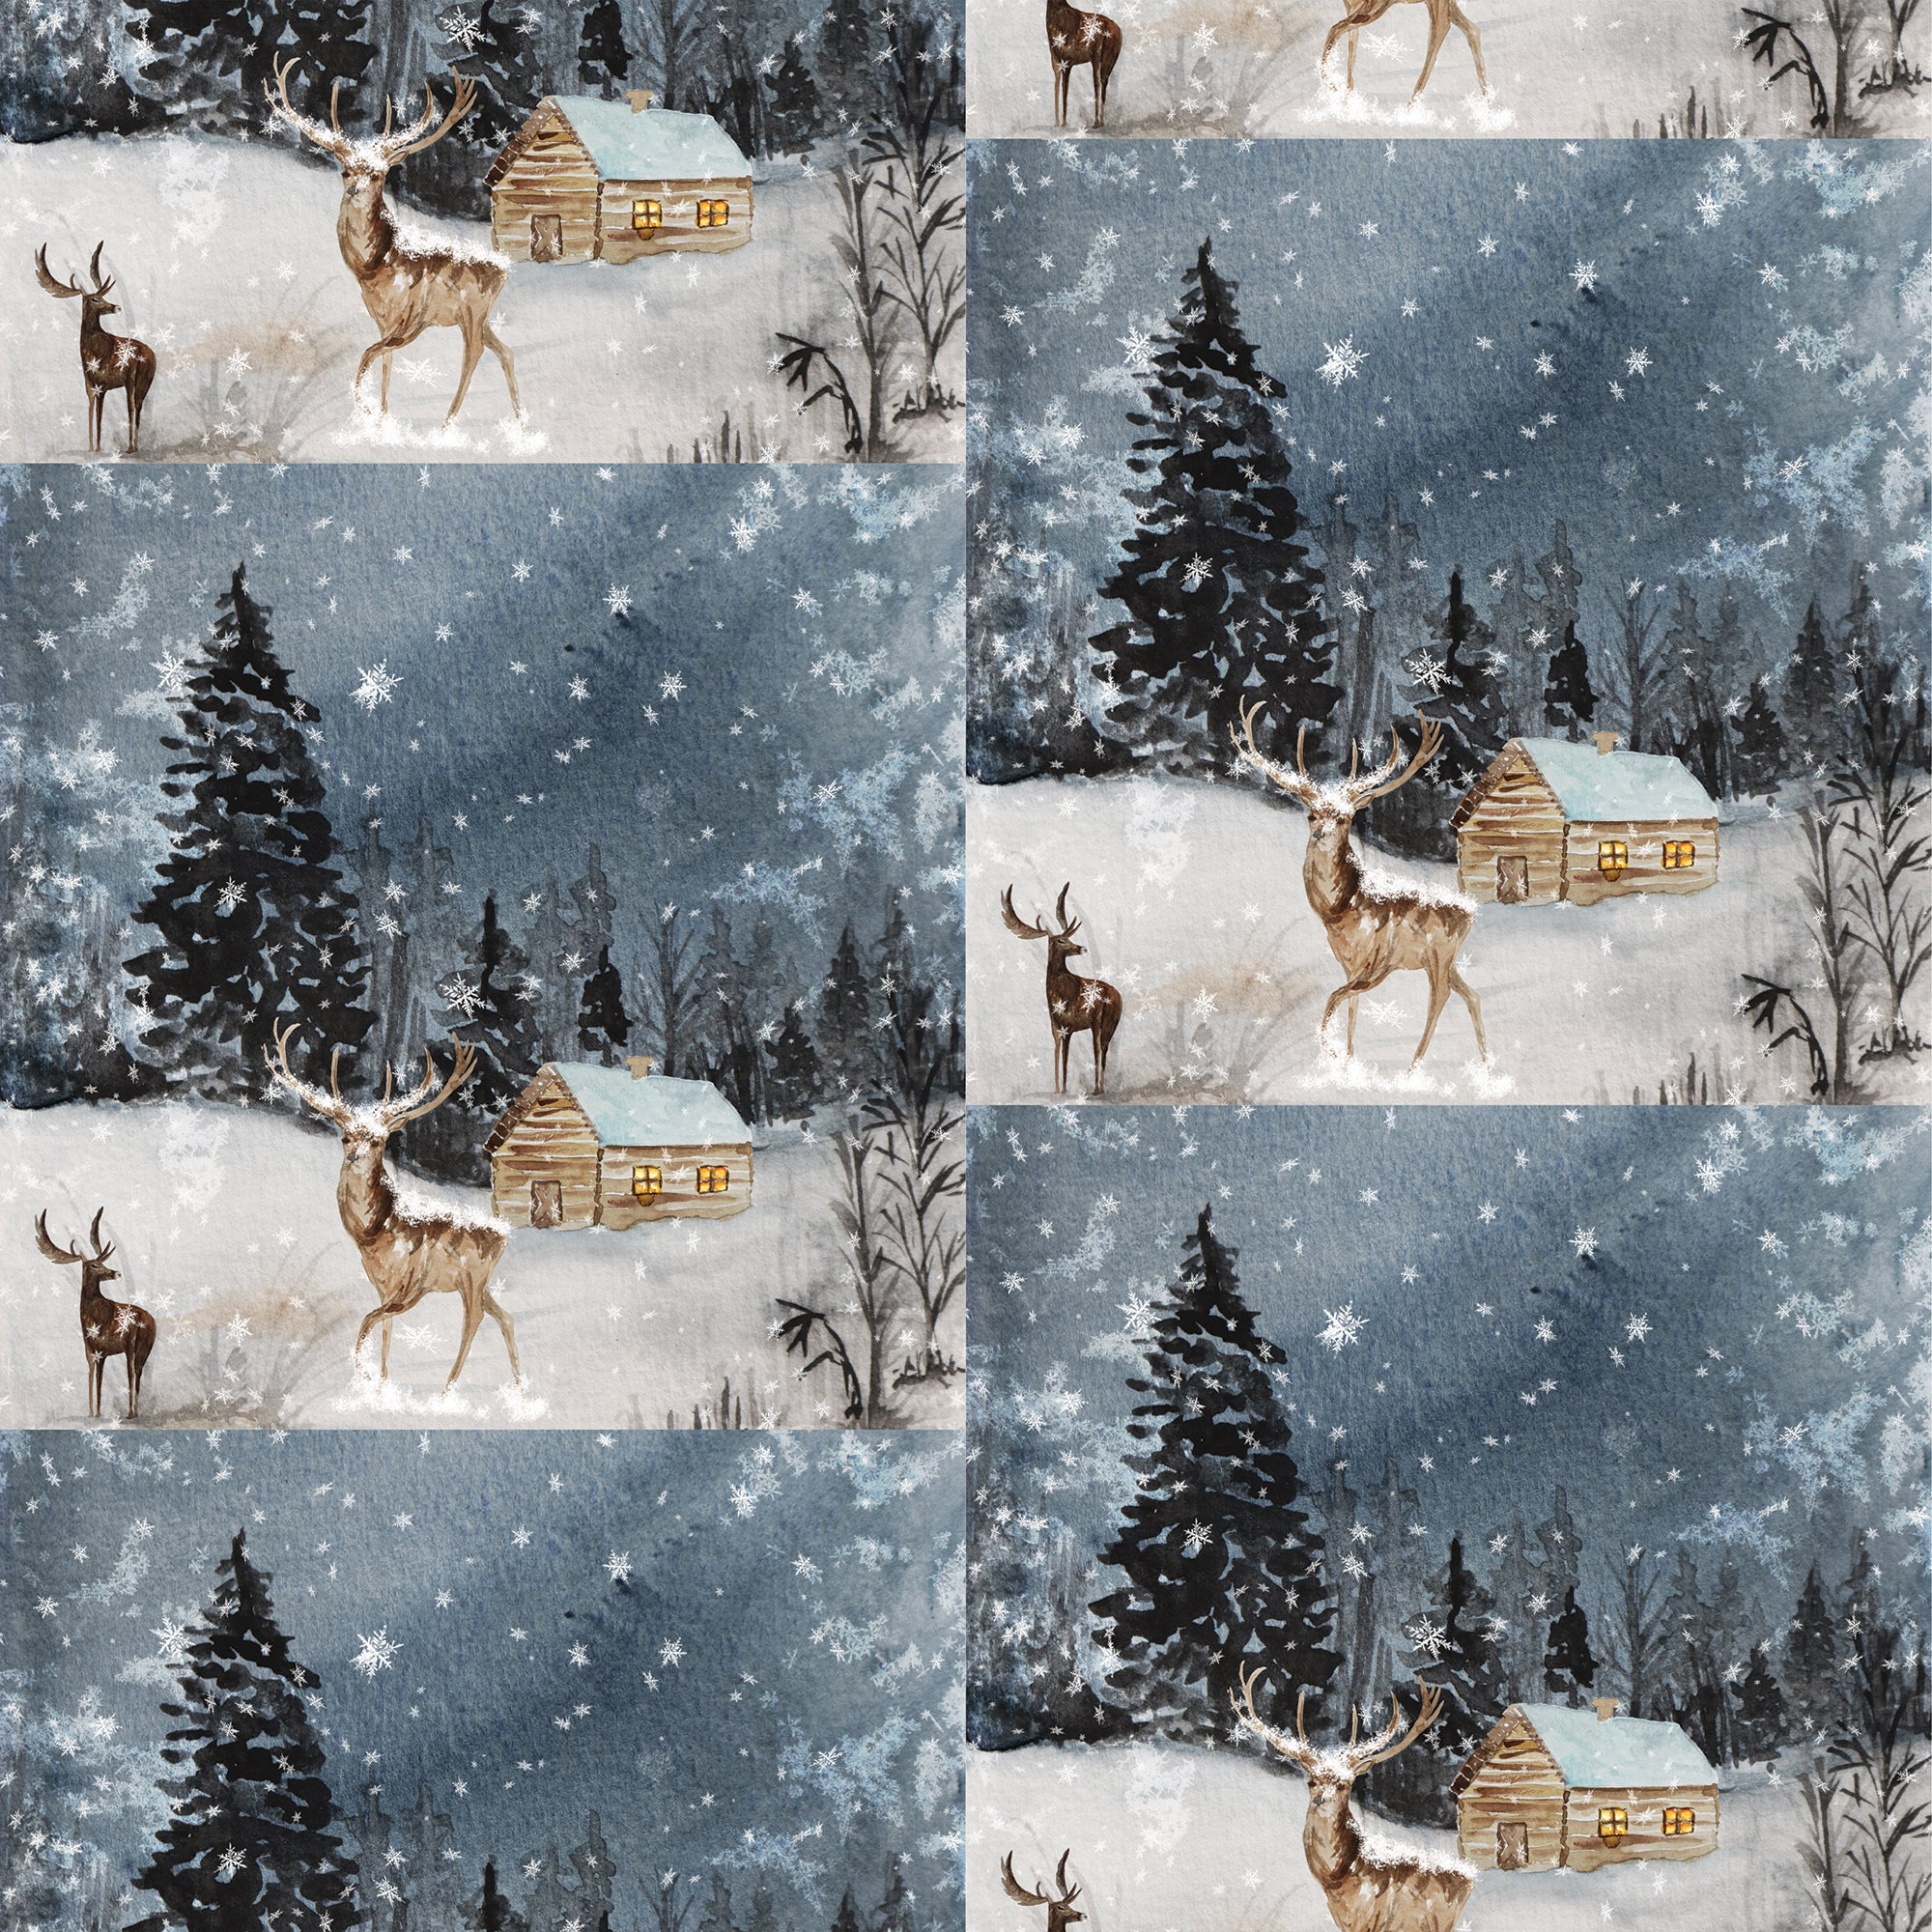 Deers in snow with pine trees and a cabin in the background at night